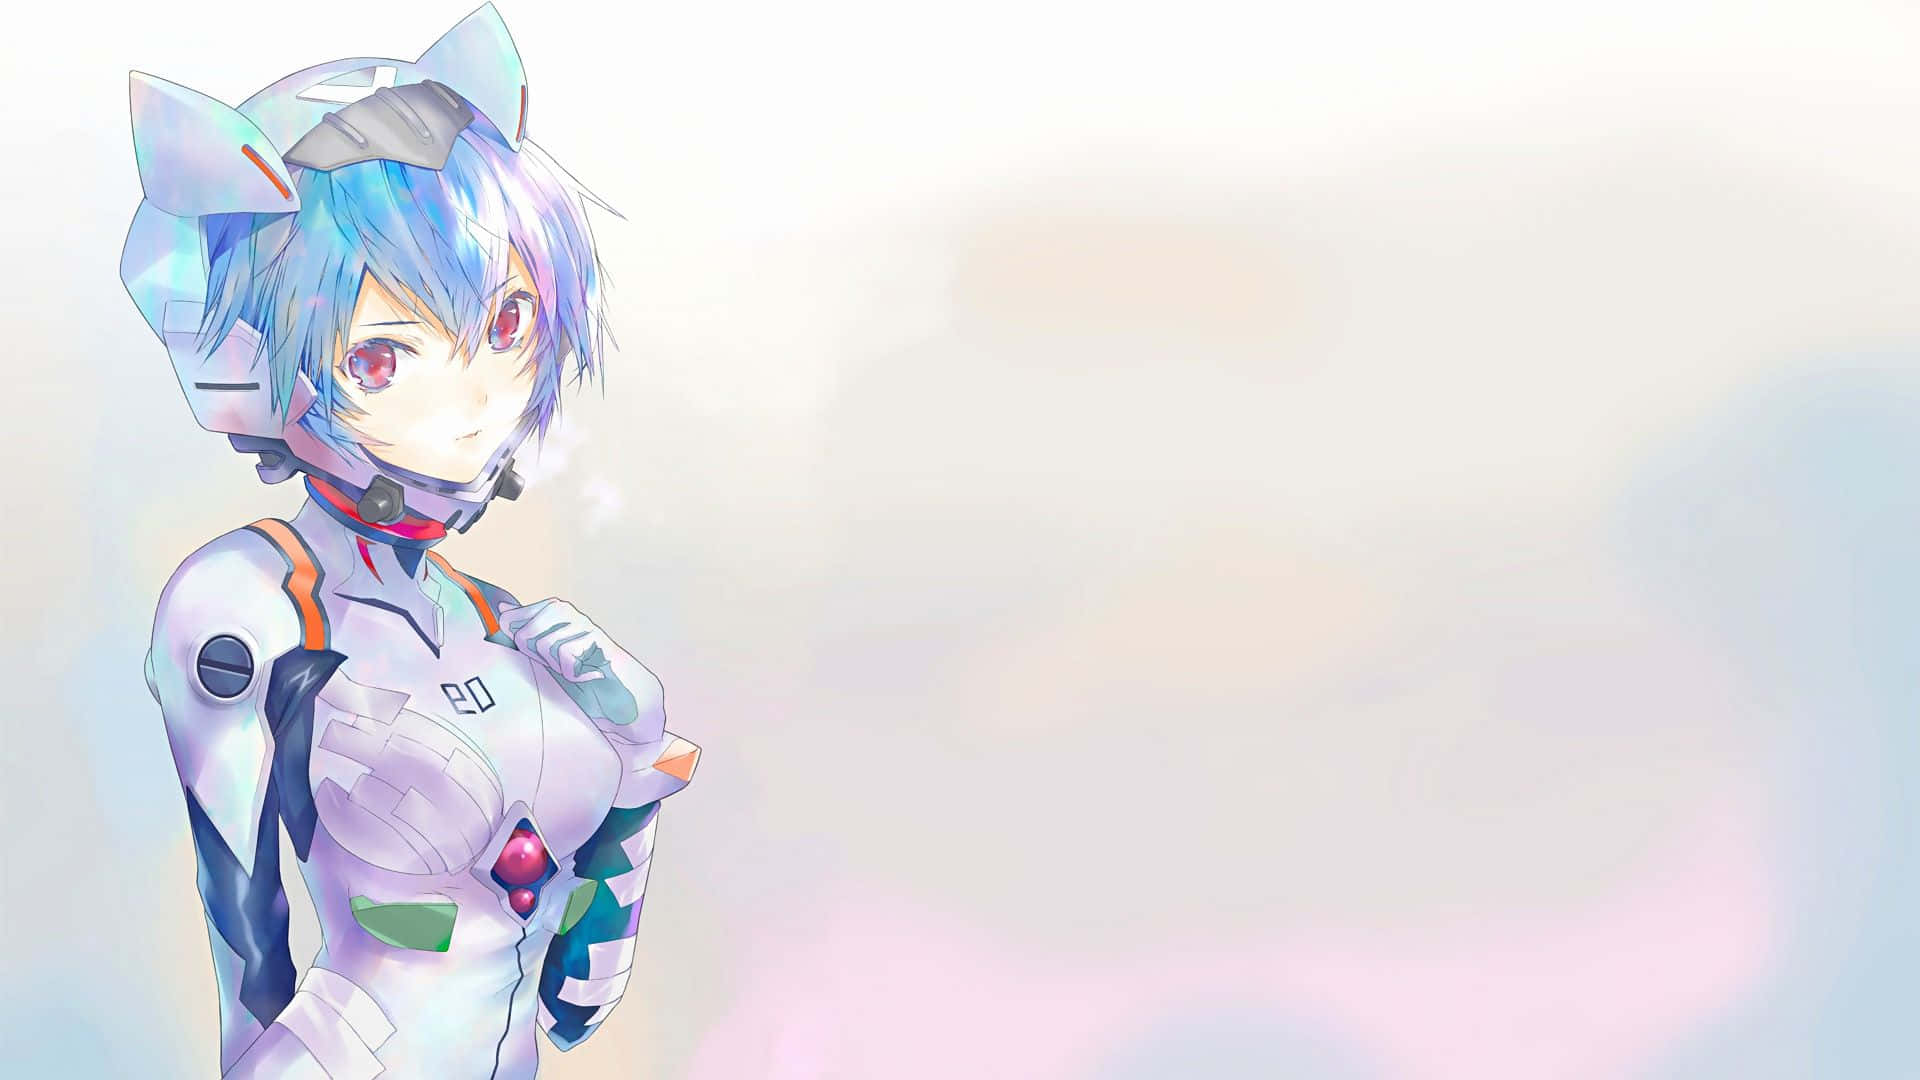 Rei Ayanami: Mysterious And Powerful Evangelion Pilot